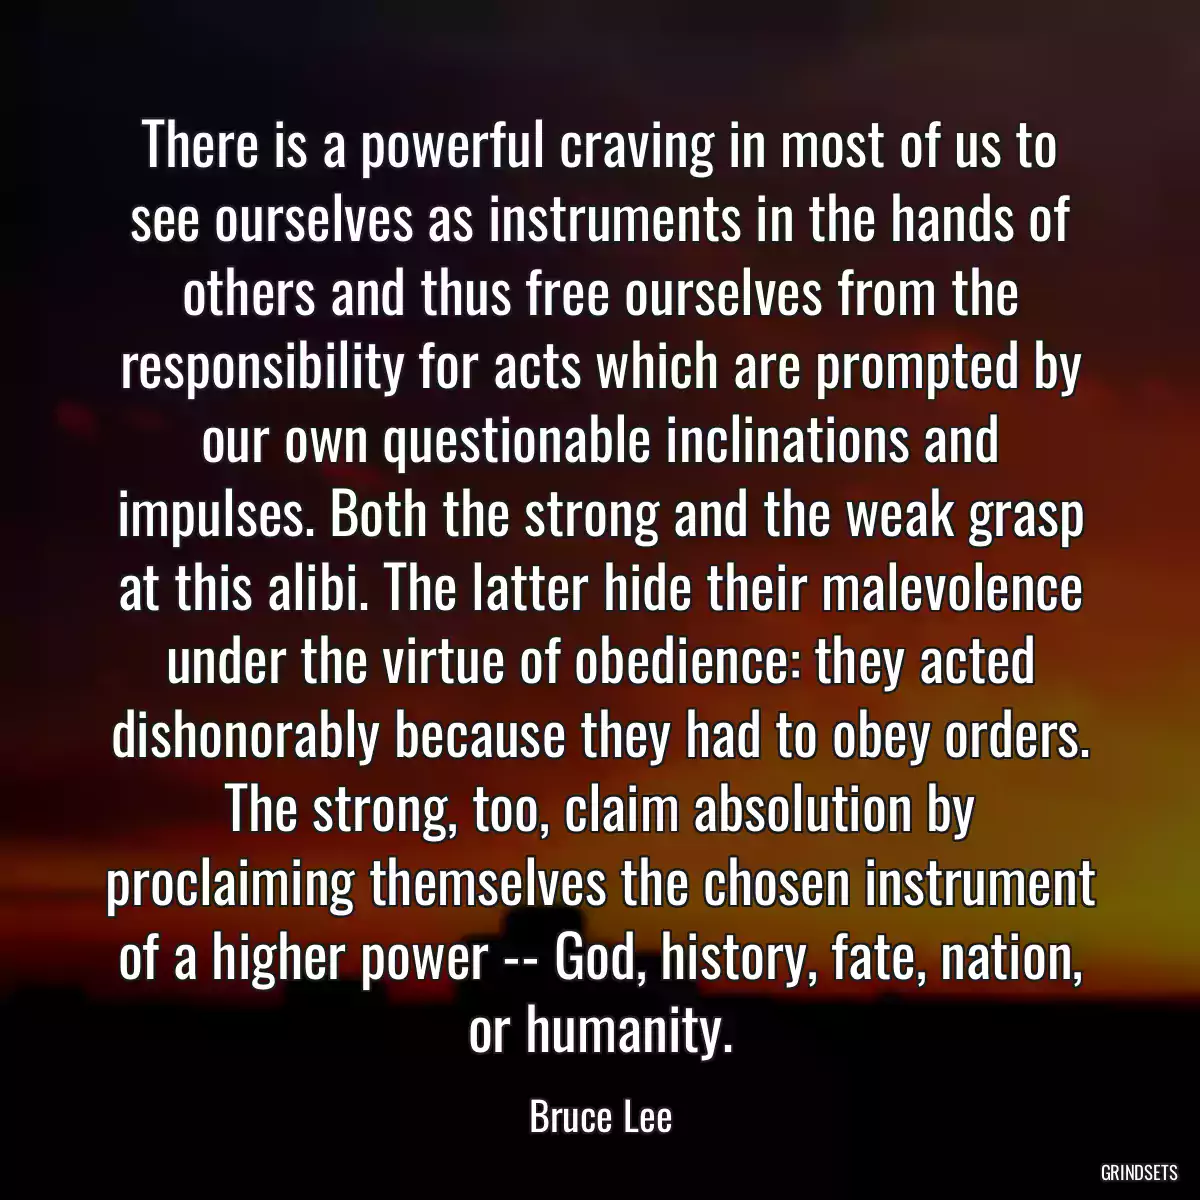 There is a powerful craving in most of us to see ourselves as instruments in the hands of others and thus free ourselves from the responsibility for acts which are prompted by our own questionable inclinations and impulses. Both the strong and the weak grasp at this alibi. The latter hide their malevolence under the virtue of obedience: they acted dishonorably because they had to obey orders. The strong, too, claim absolution by proclaiming themselves the chosen instrument of a higher power -- God, history, fate, nation, or humanity.